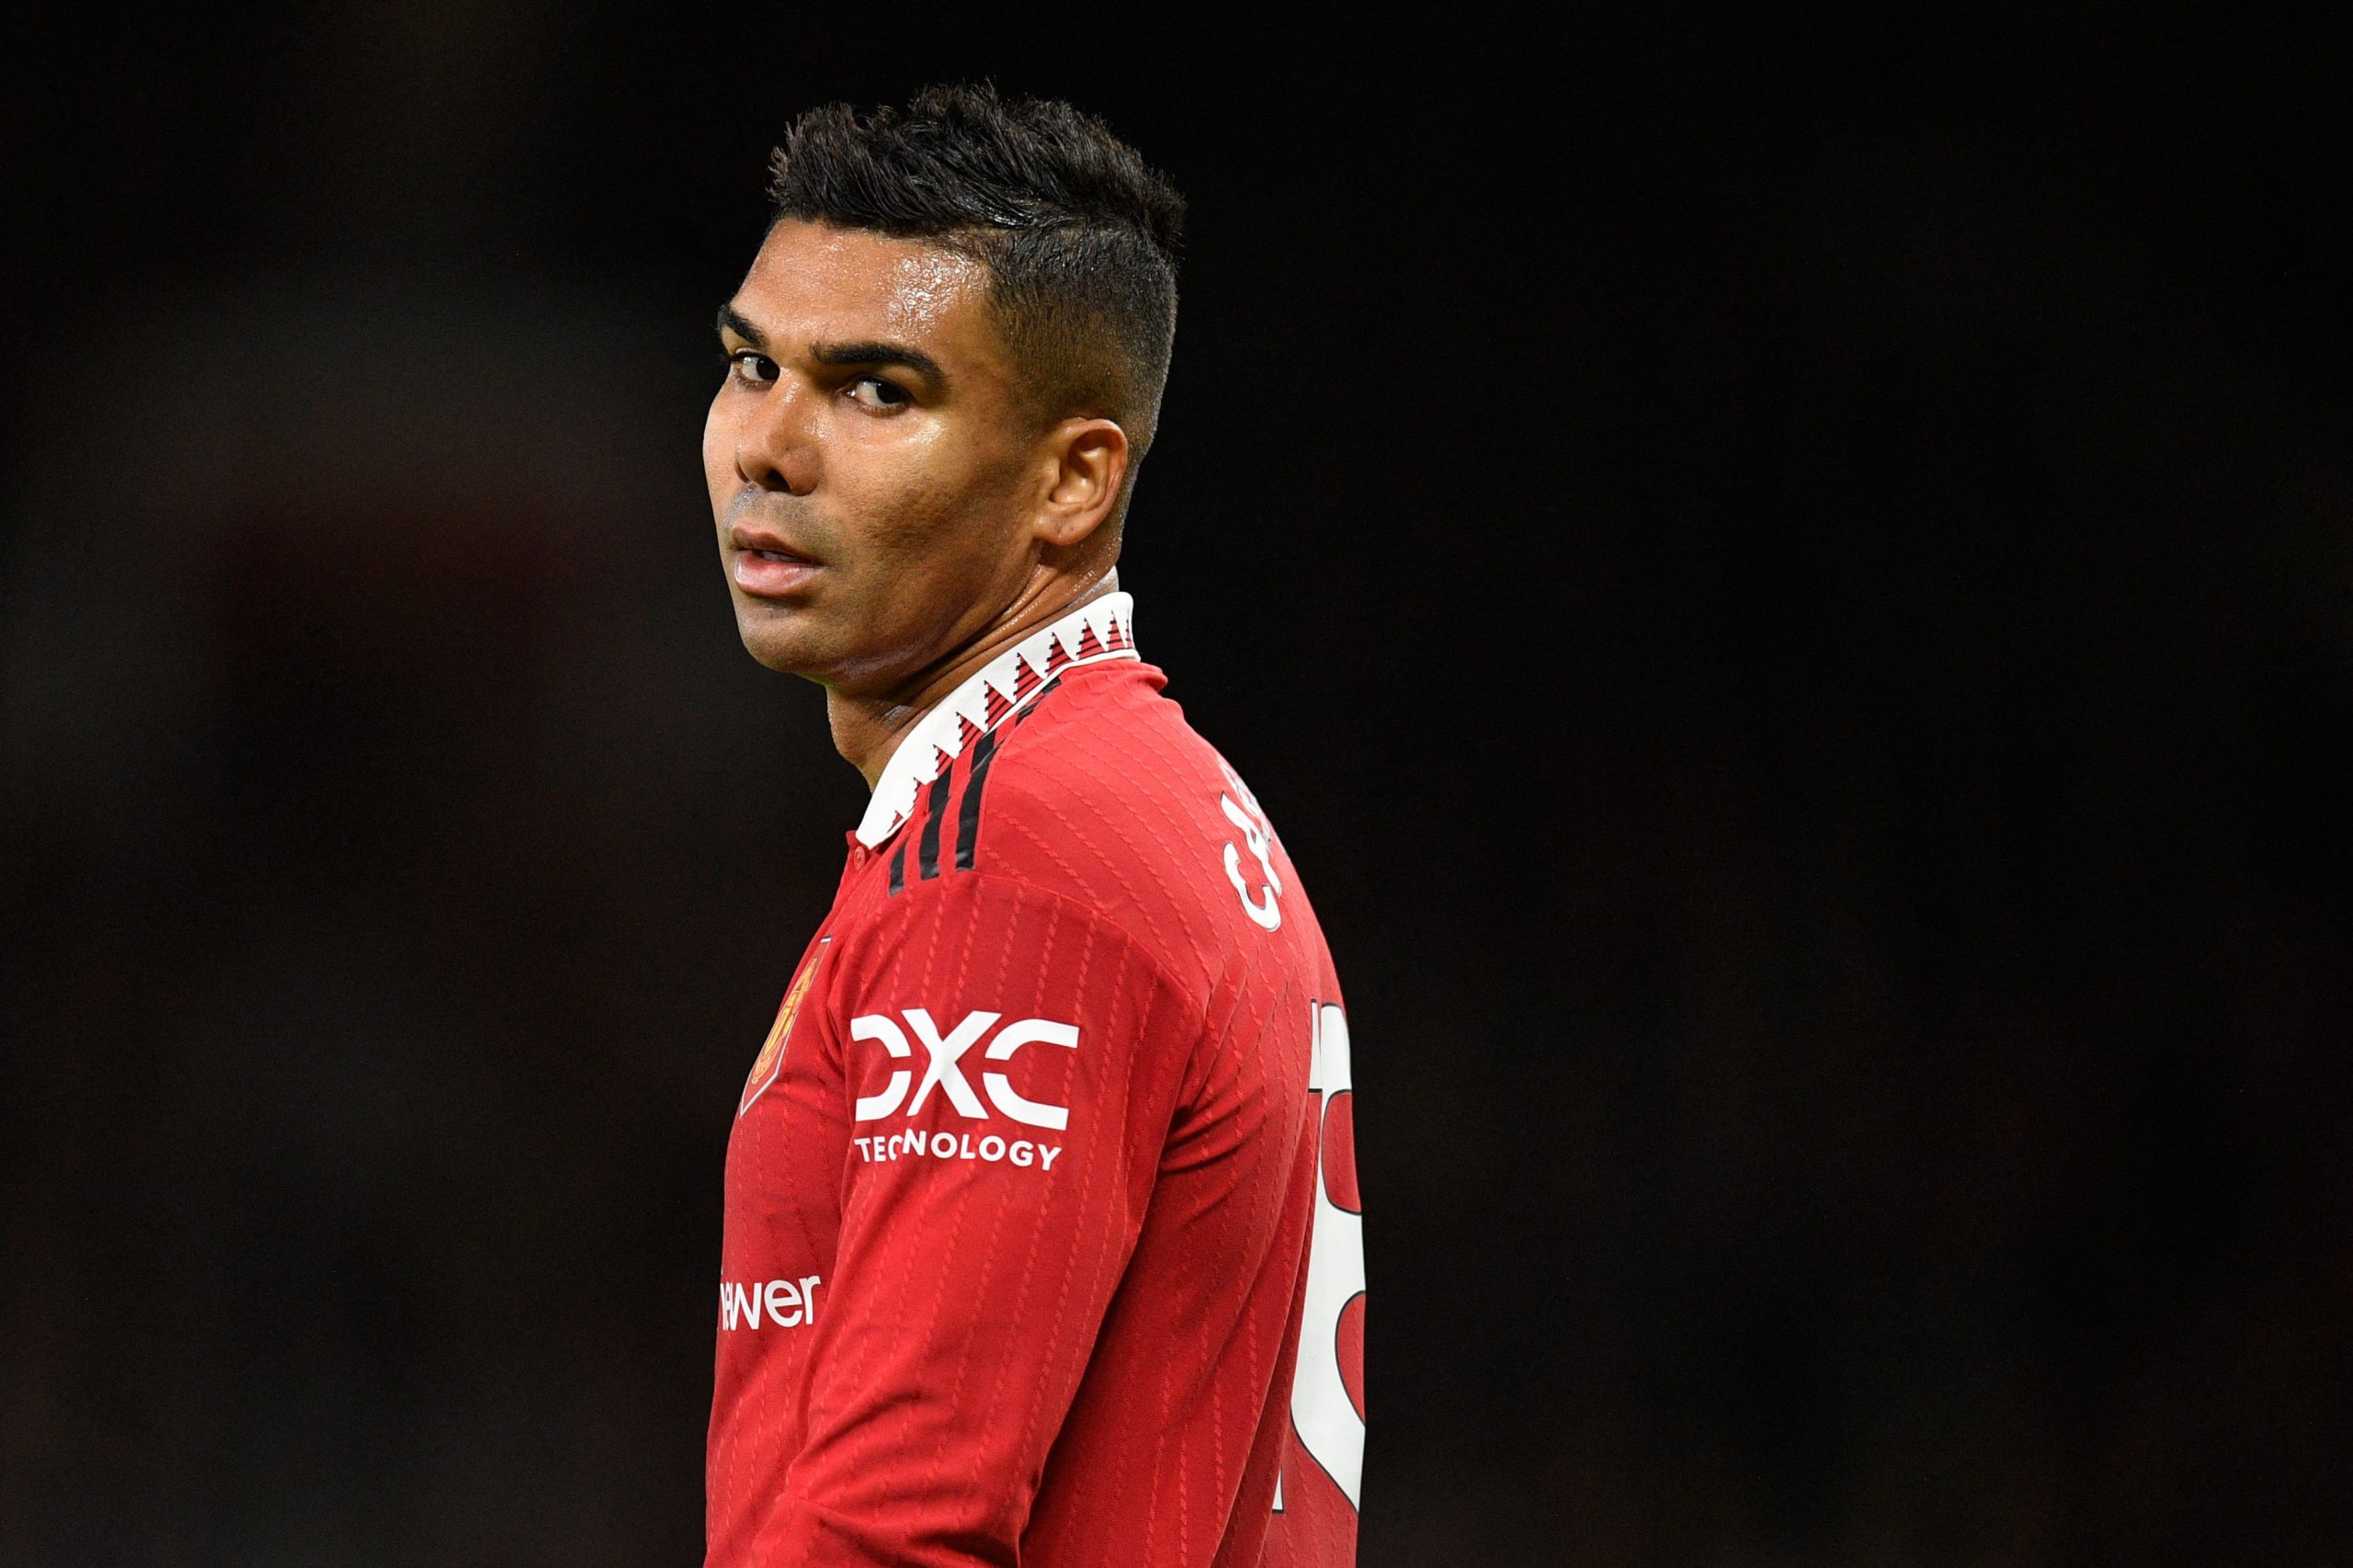 Manchester United's Brazilian midfielder Casemiro looks on during the English Premier League football match between Manchester United and West Ham United at Old Trafford in Manchester, north-west England, on October 30, 2022